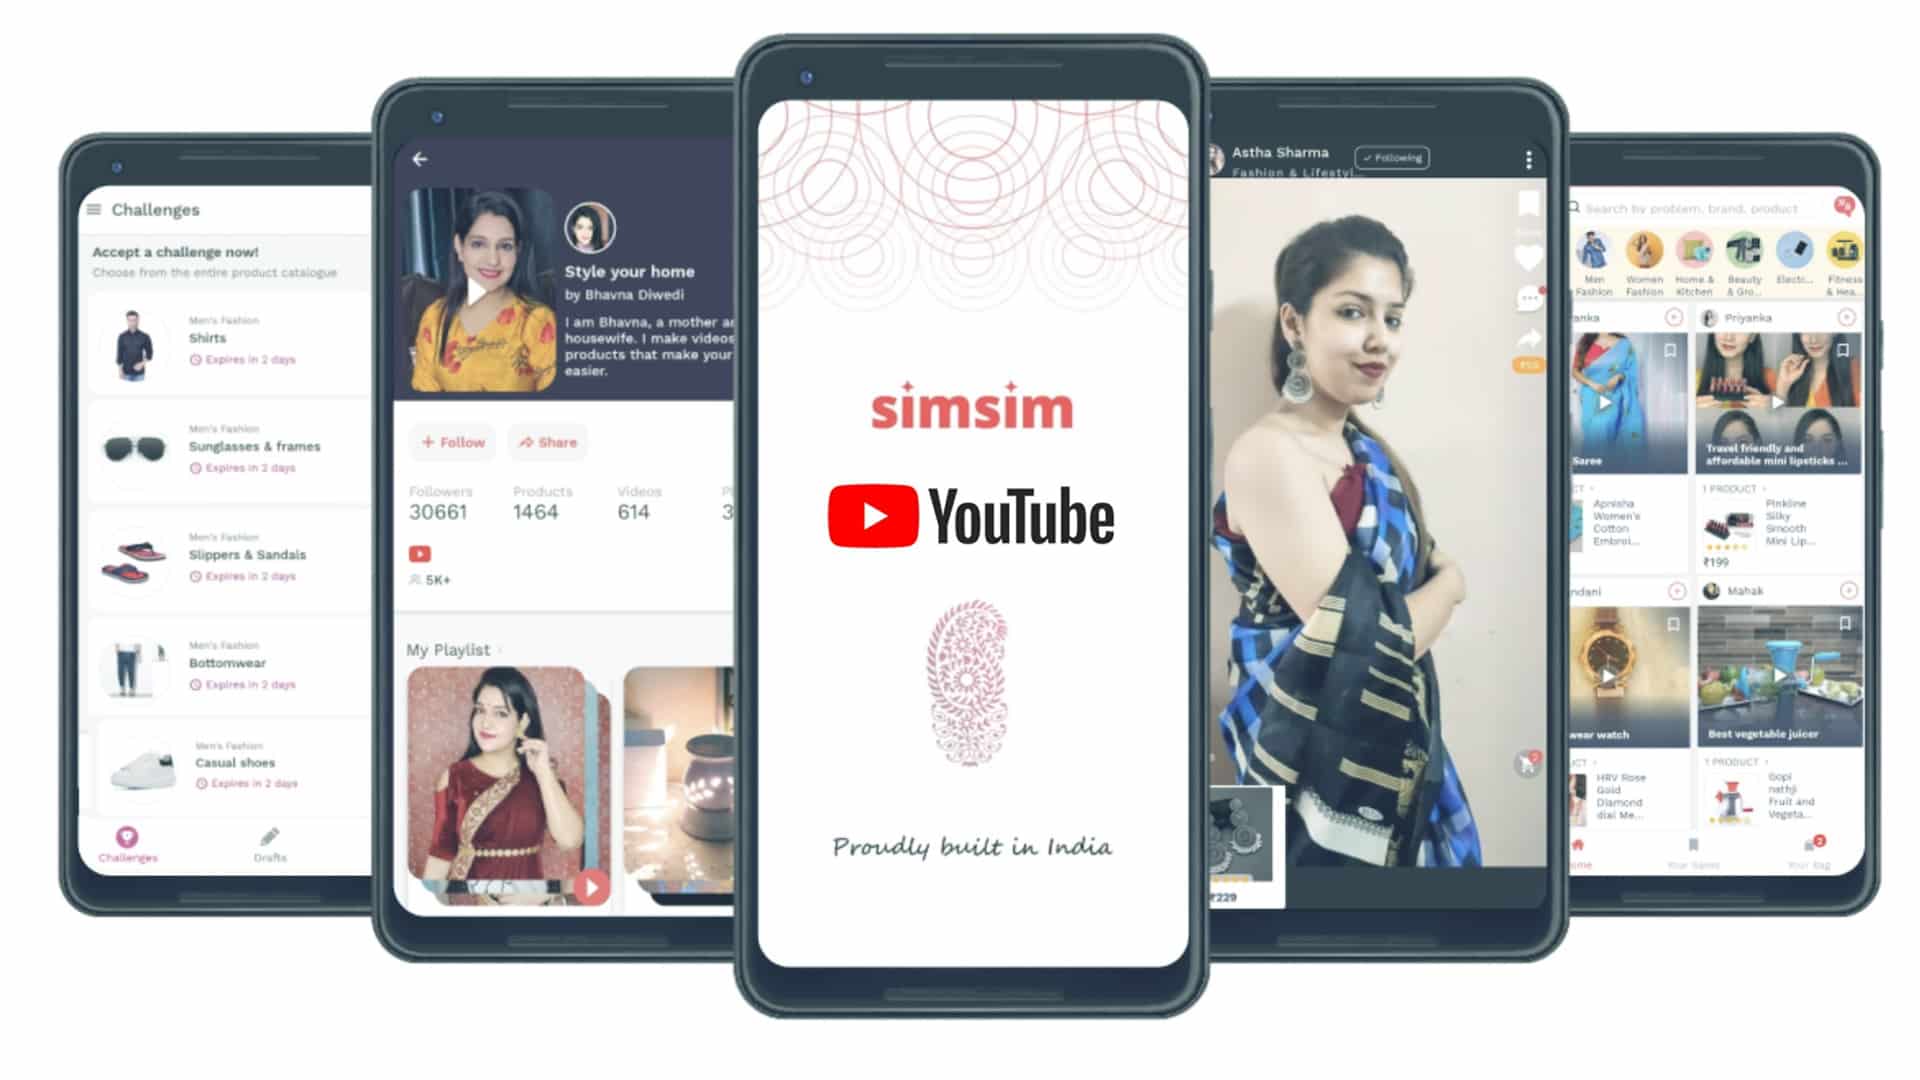 YouTube to acquire Indian video e-commerce platform Simsim